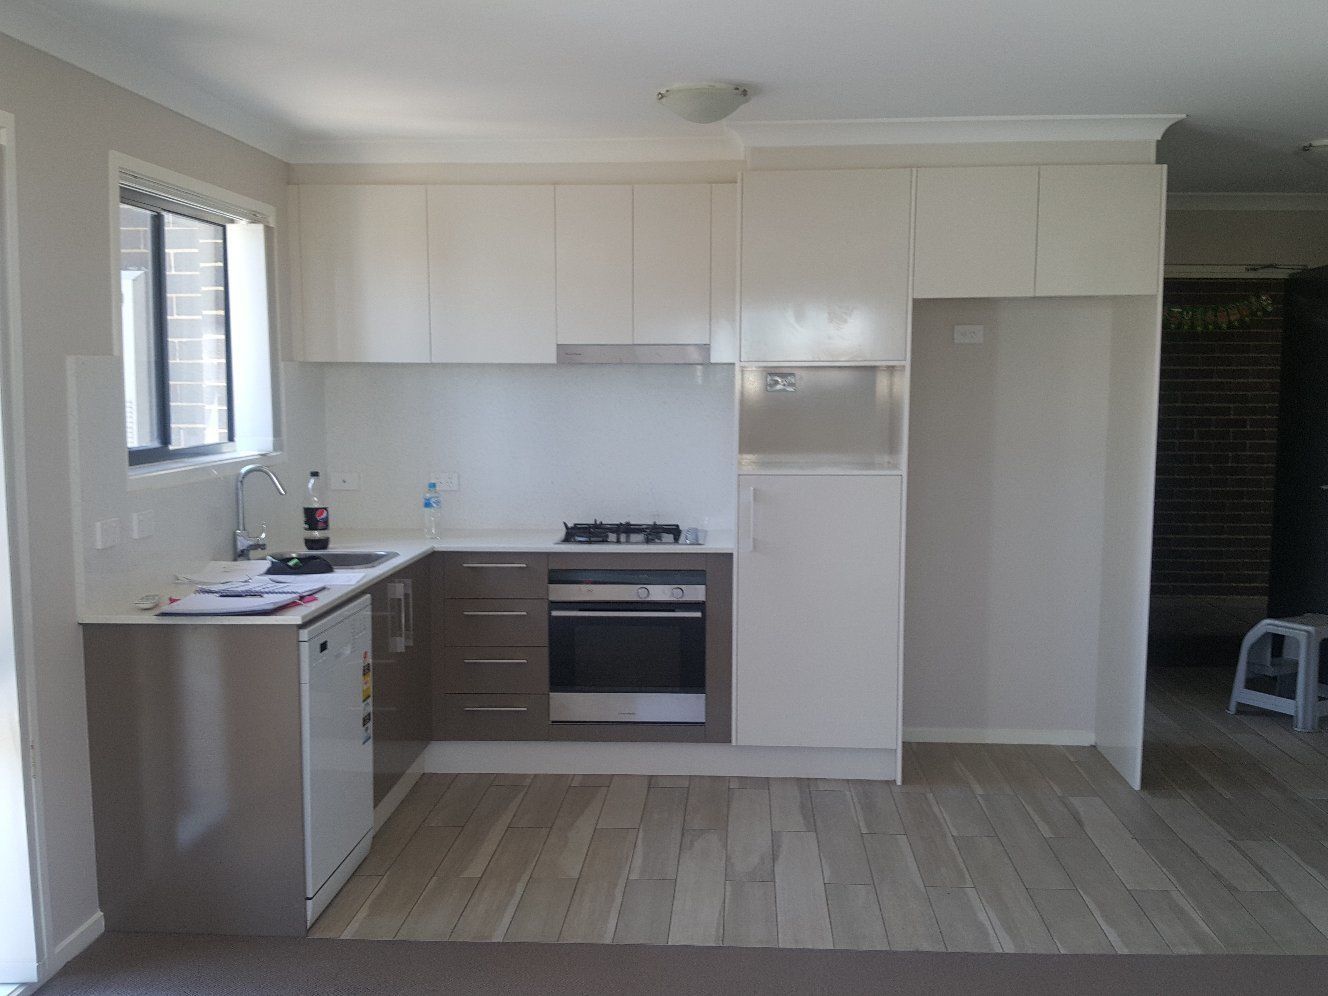 2 bedrooms Apartment / Unit / Flat in 1 Gifford Street COOMBS ACT, 2611